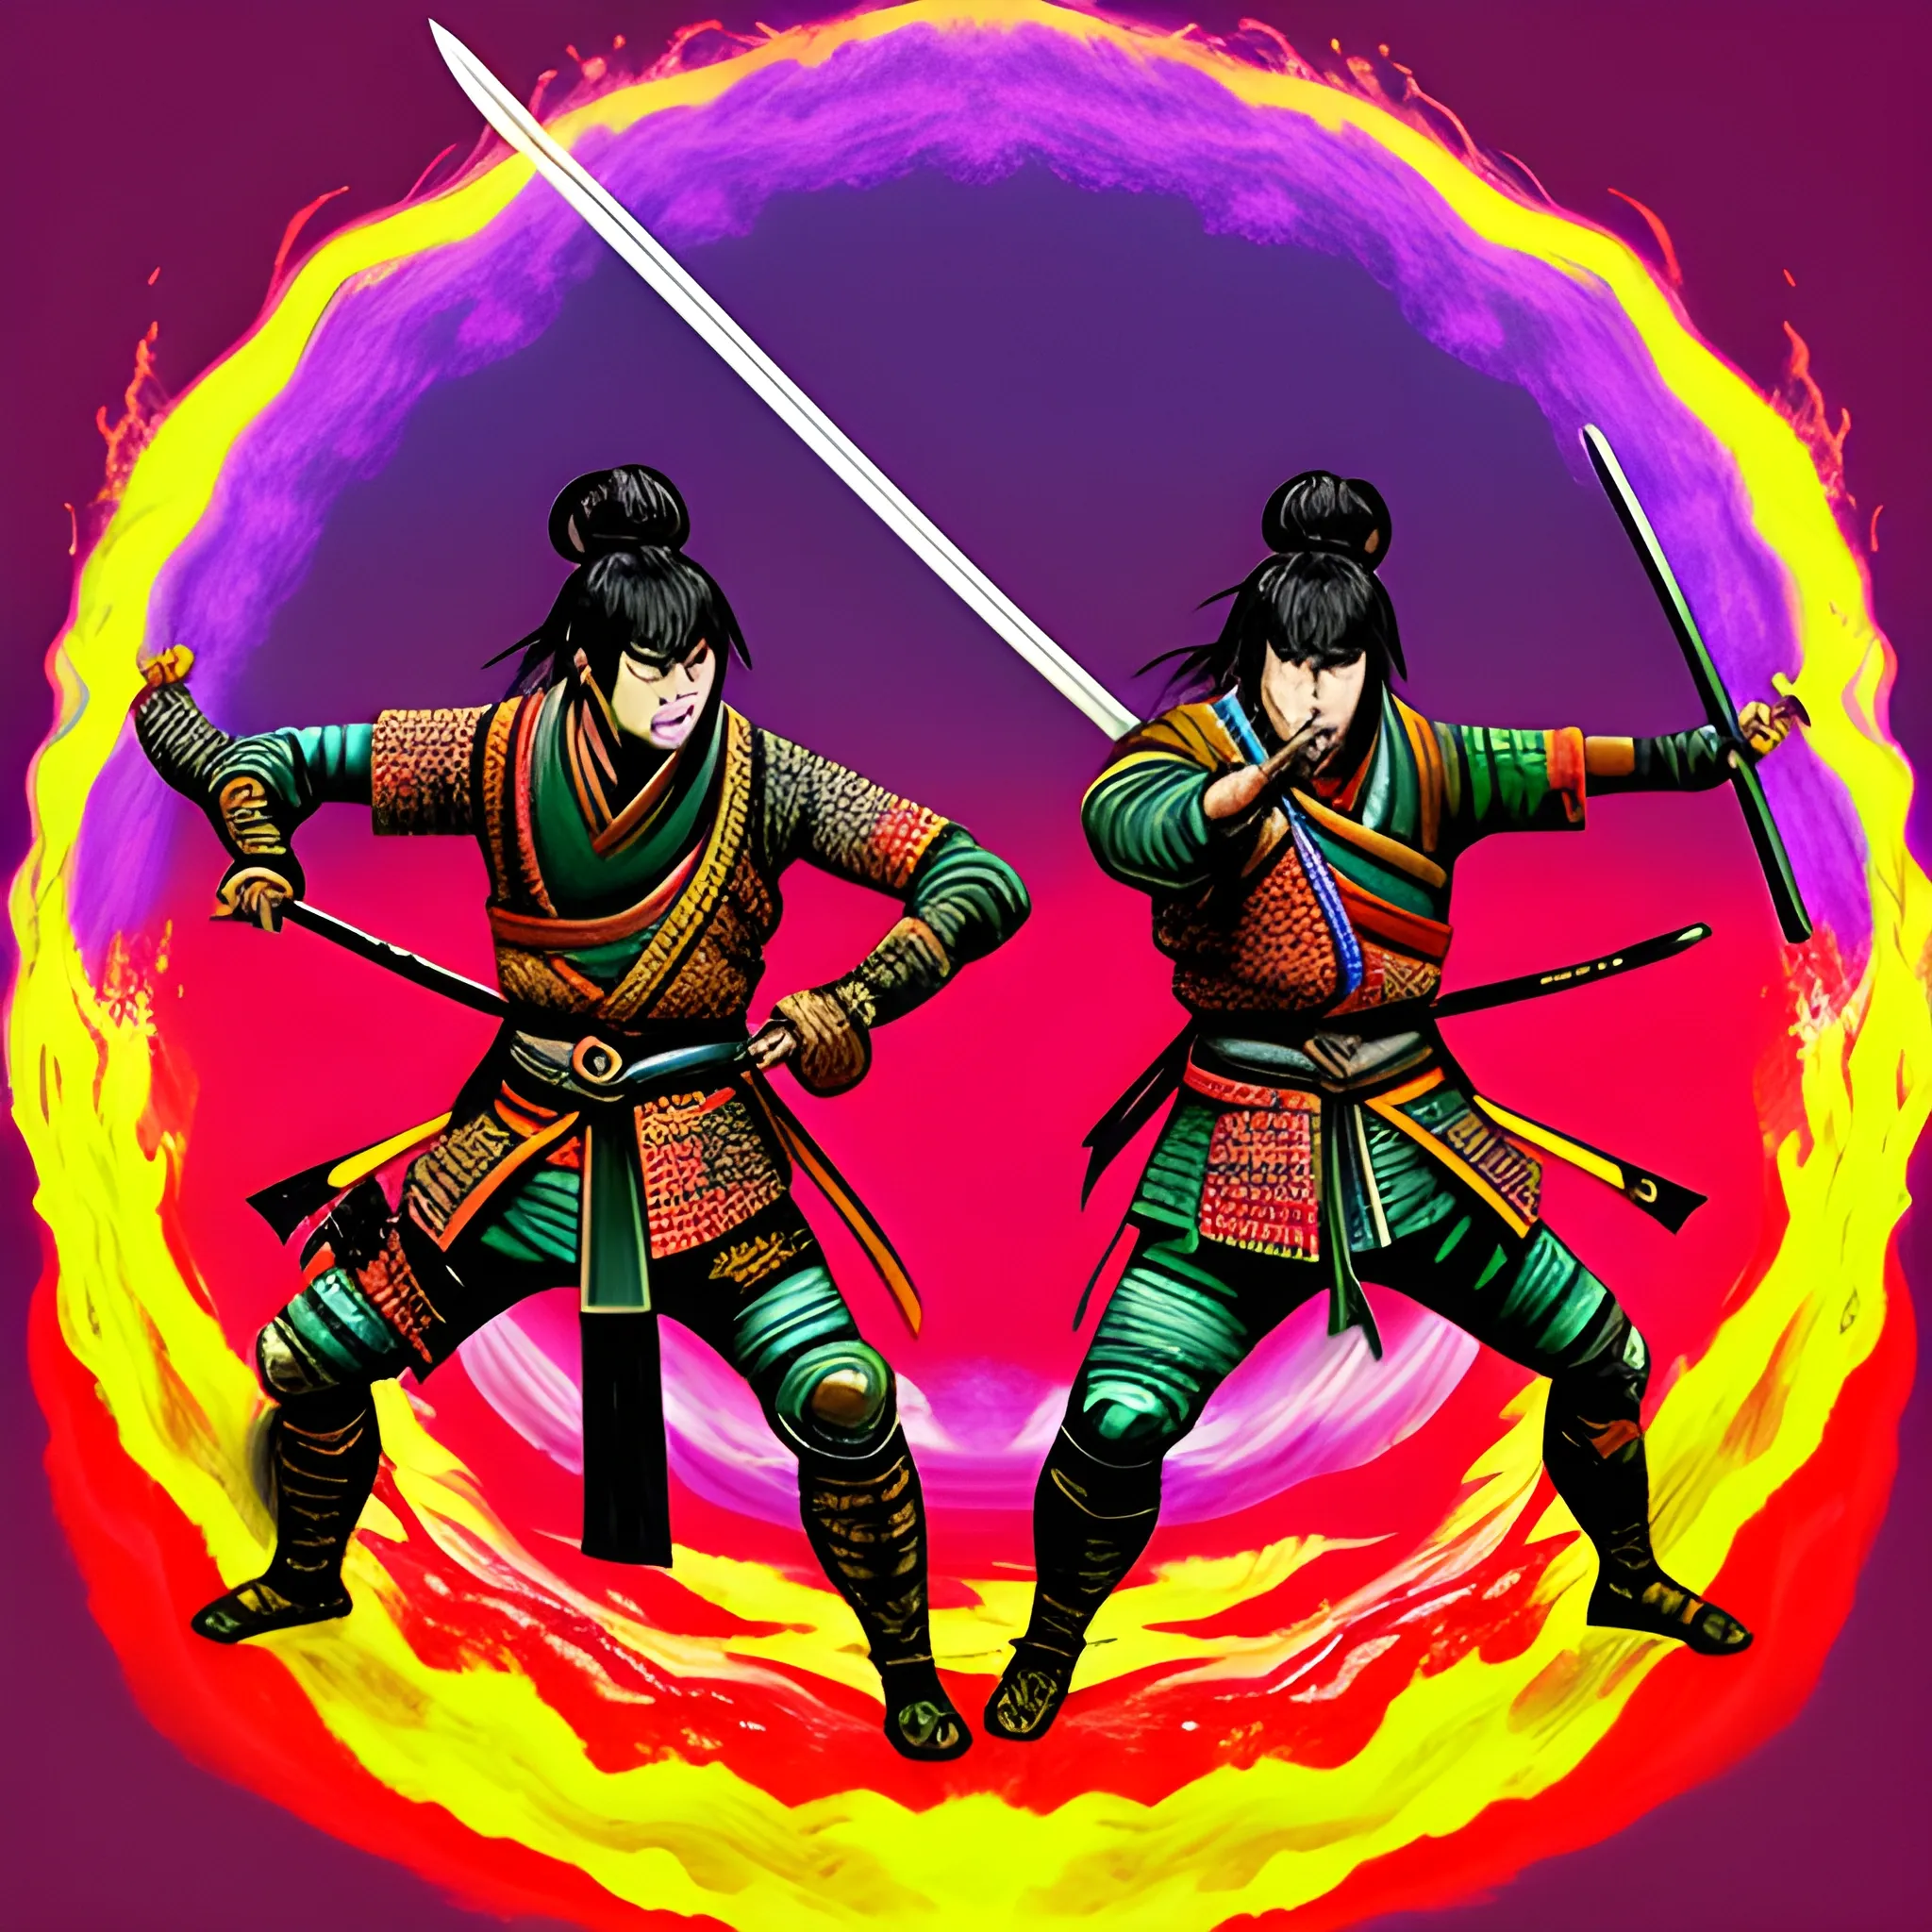 two samurais with swords fighting to the death 
,psychedelic